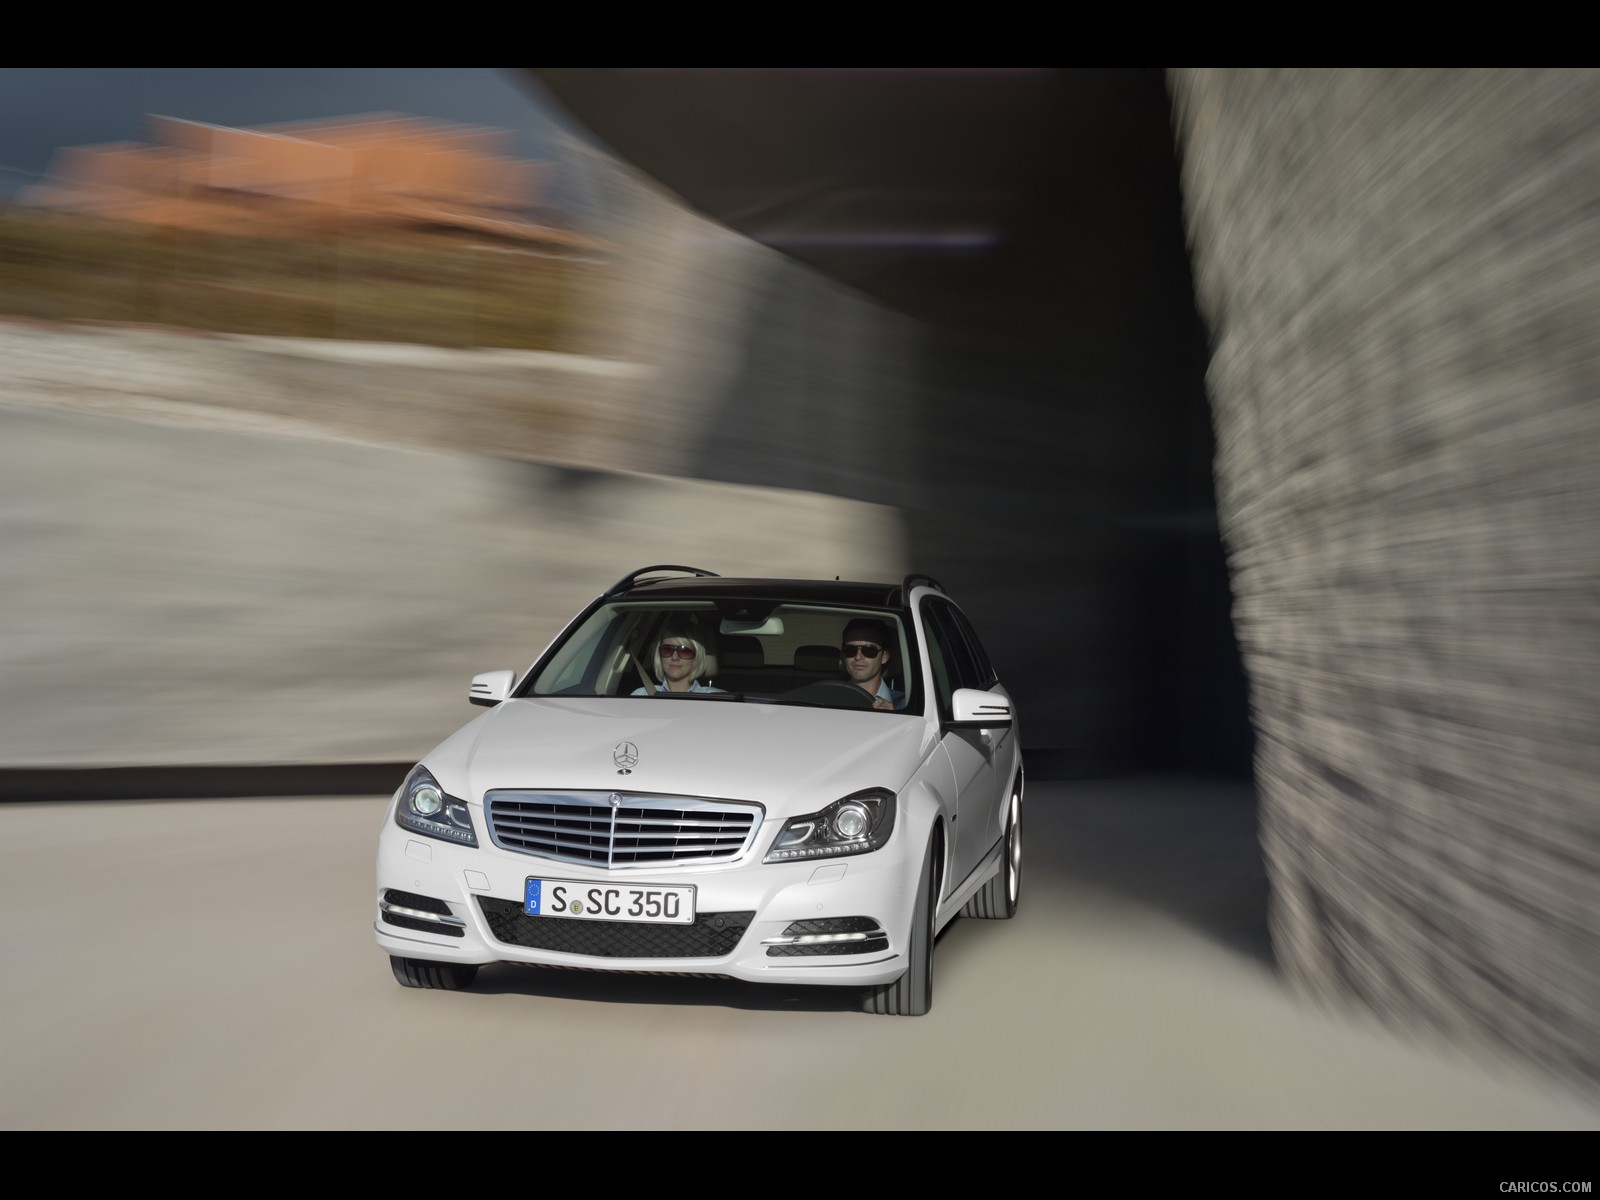 Mercedes-Benz C-Class Estate (2012)  - Front Angle , #6 of 36